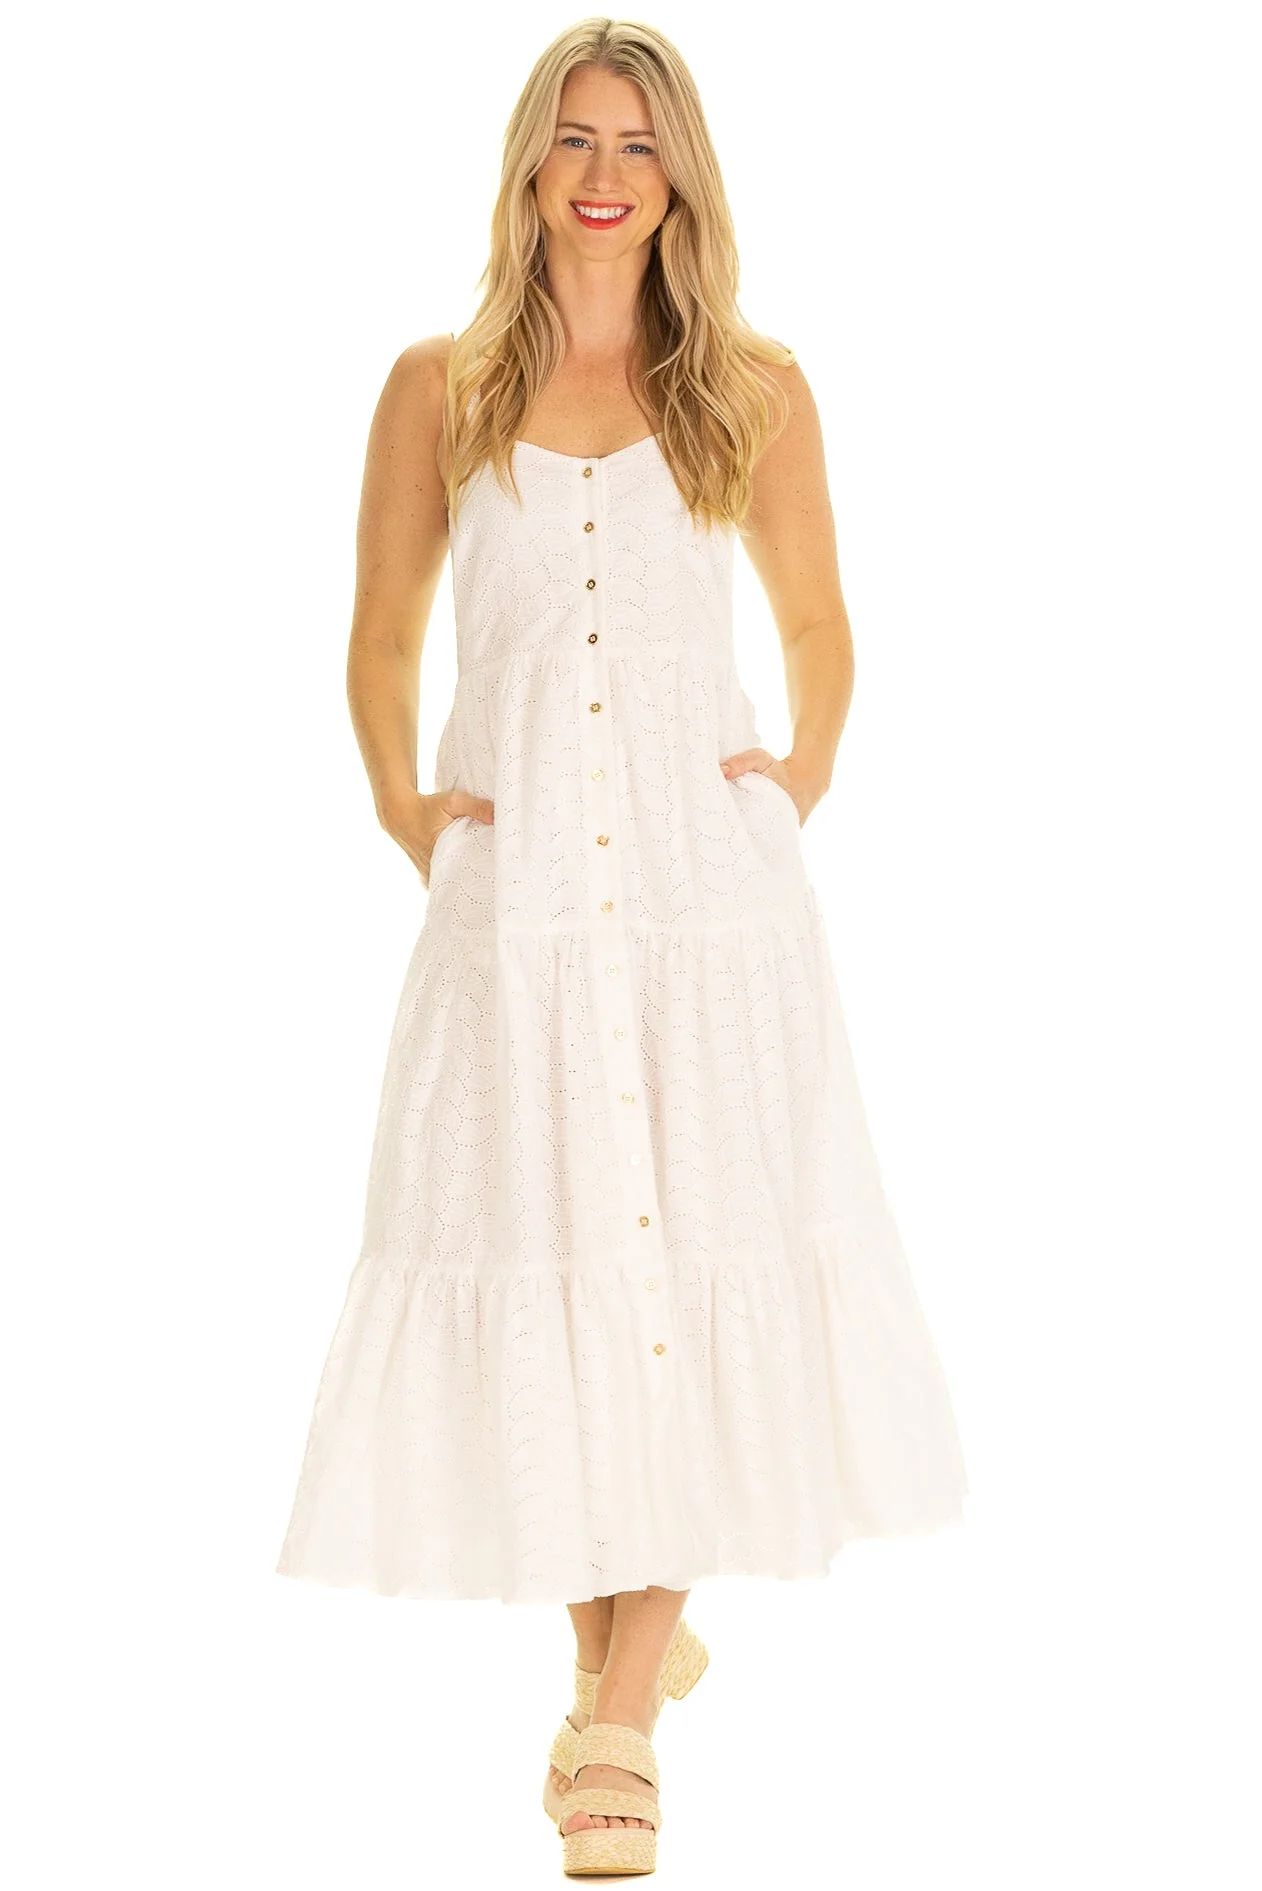 White Eyelet Tiered Dress with Adjustable Straps - Duffield Lane | Duffield Lane